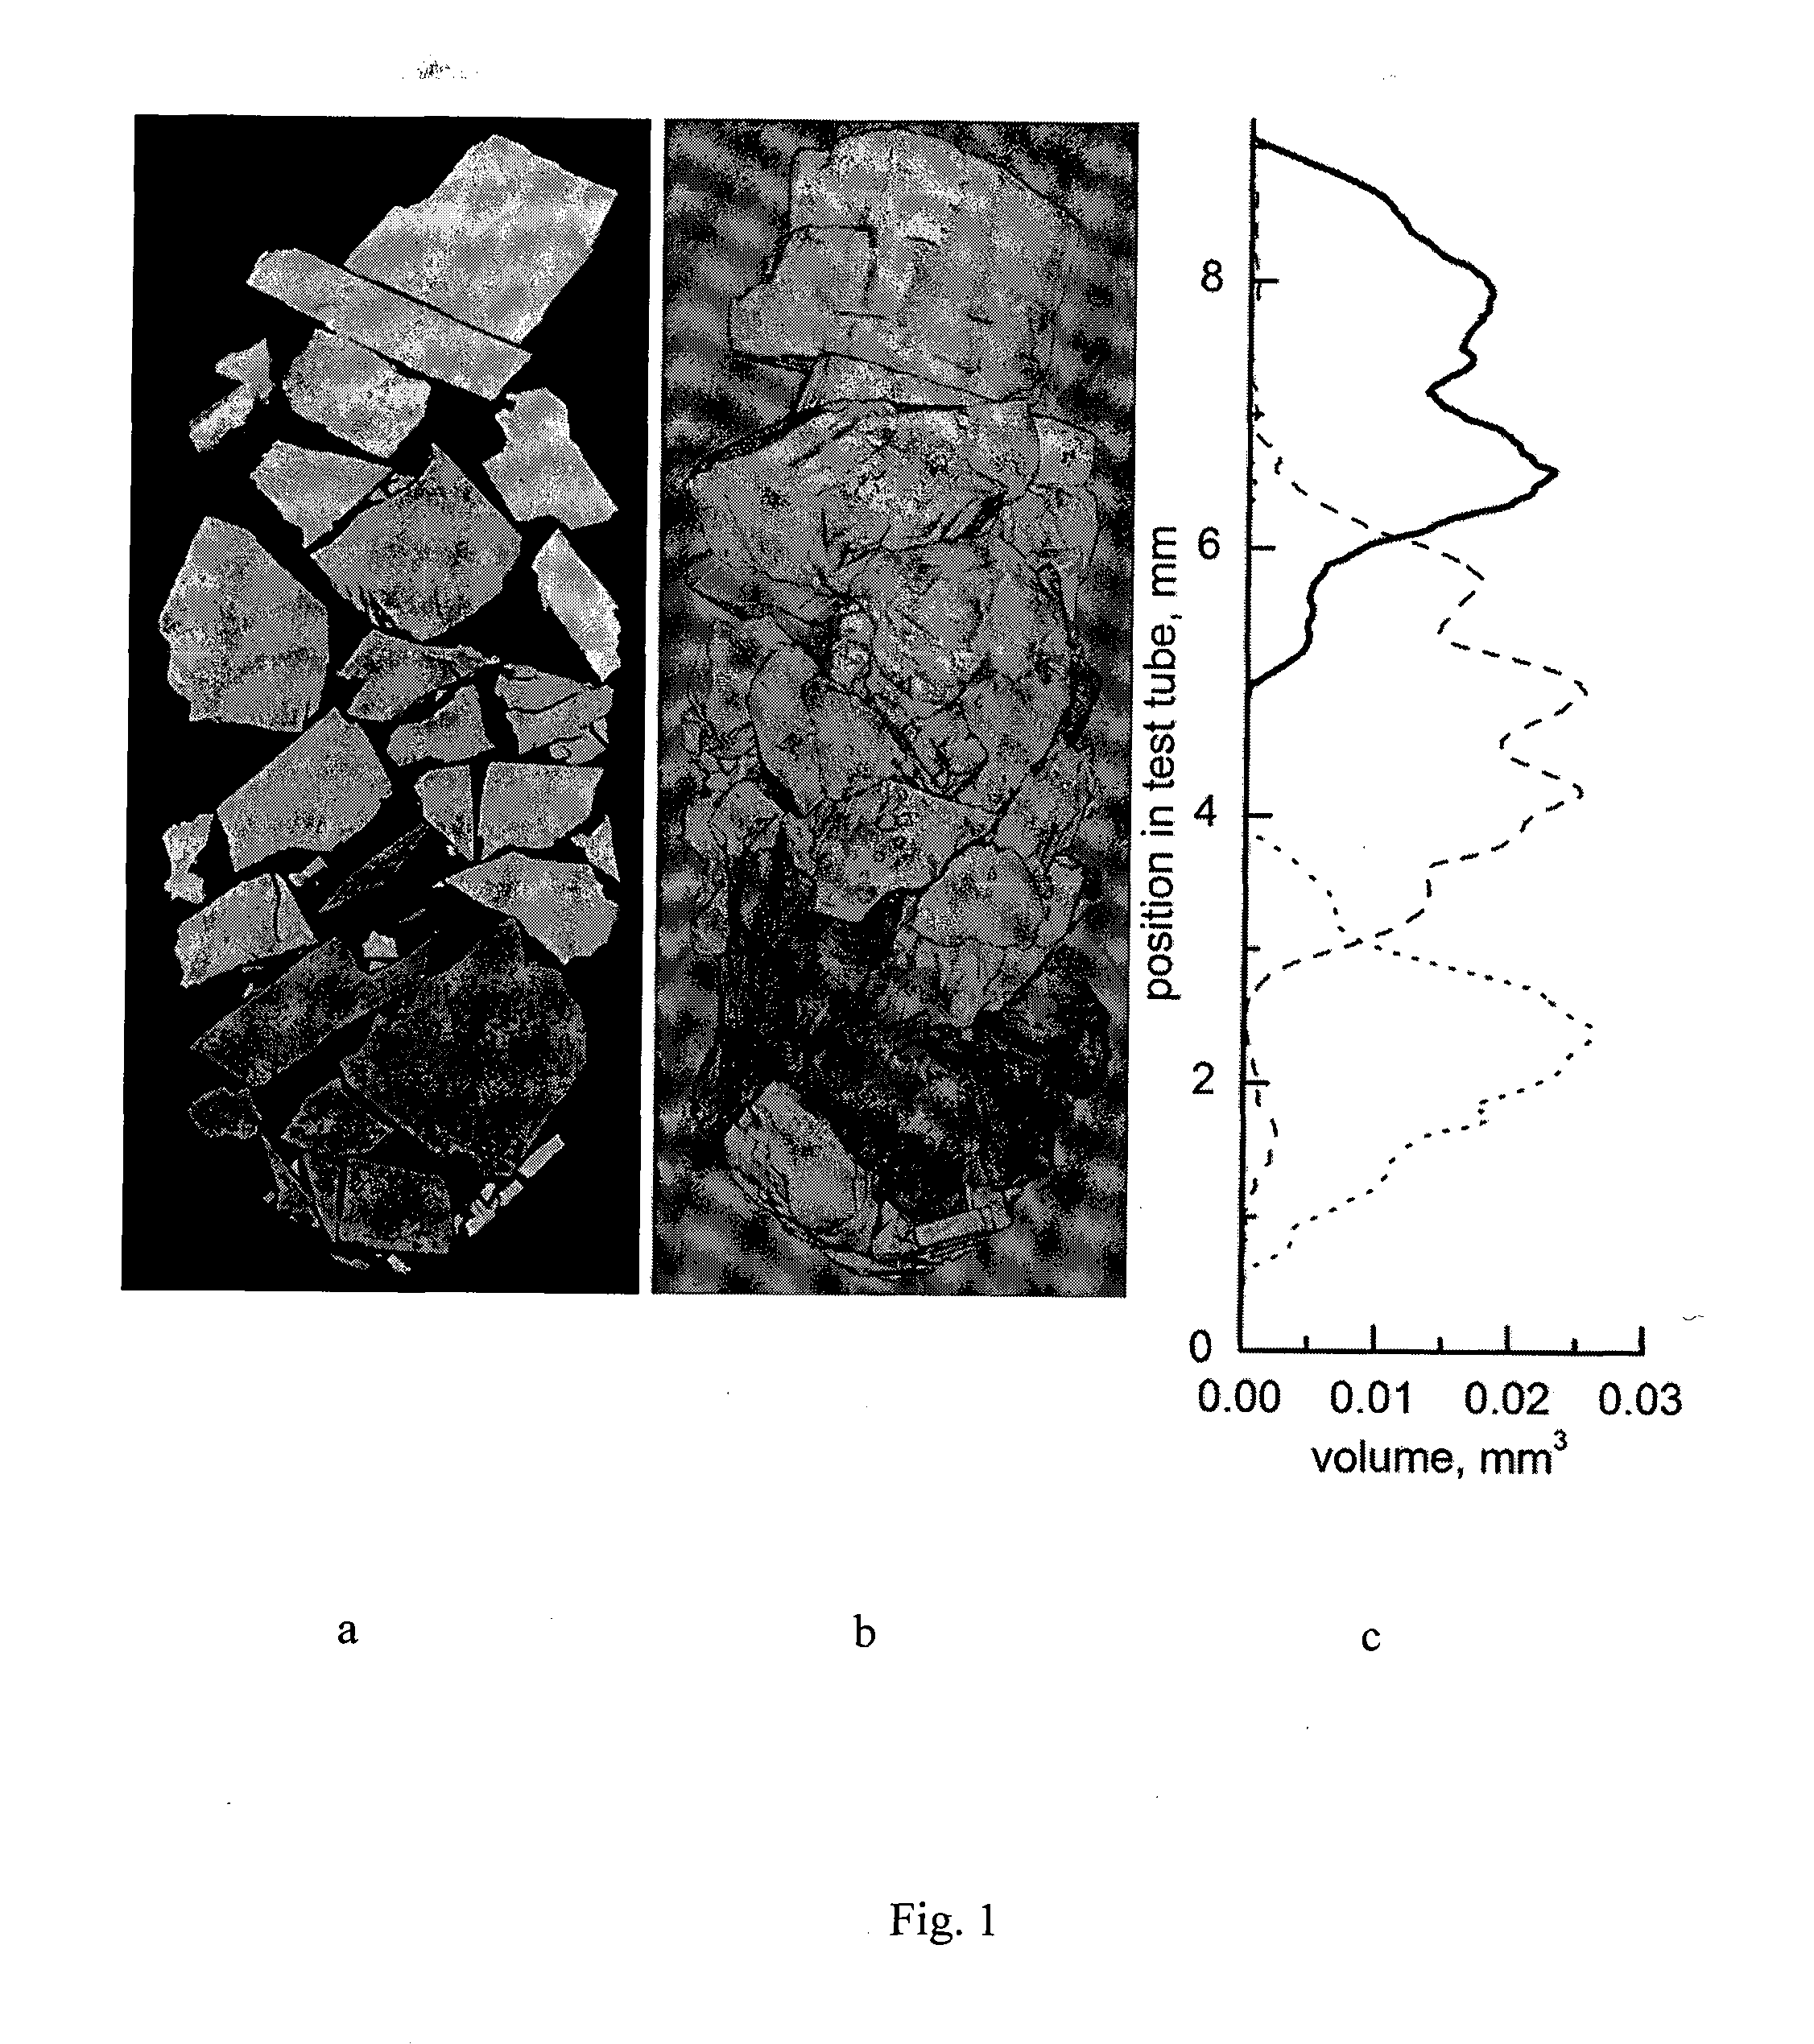 Method for 3D mineral mapping of a rock sample